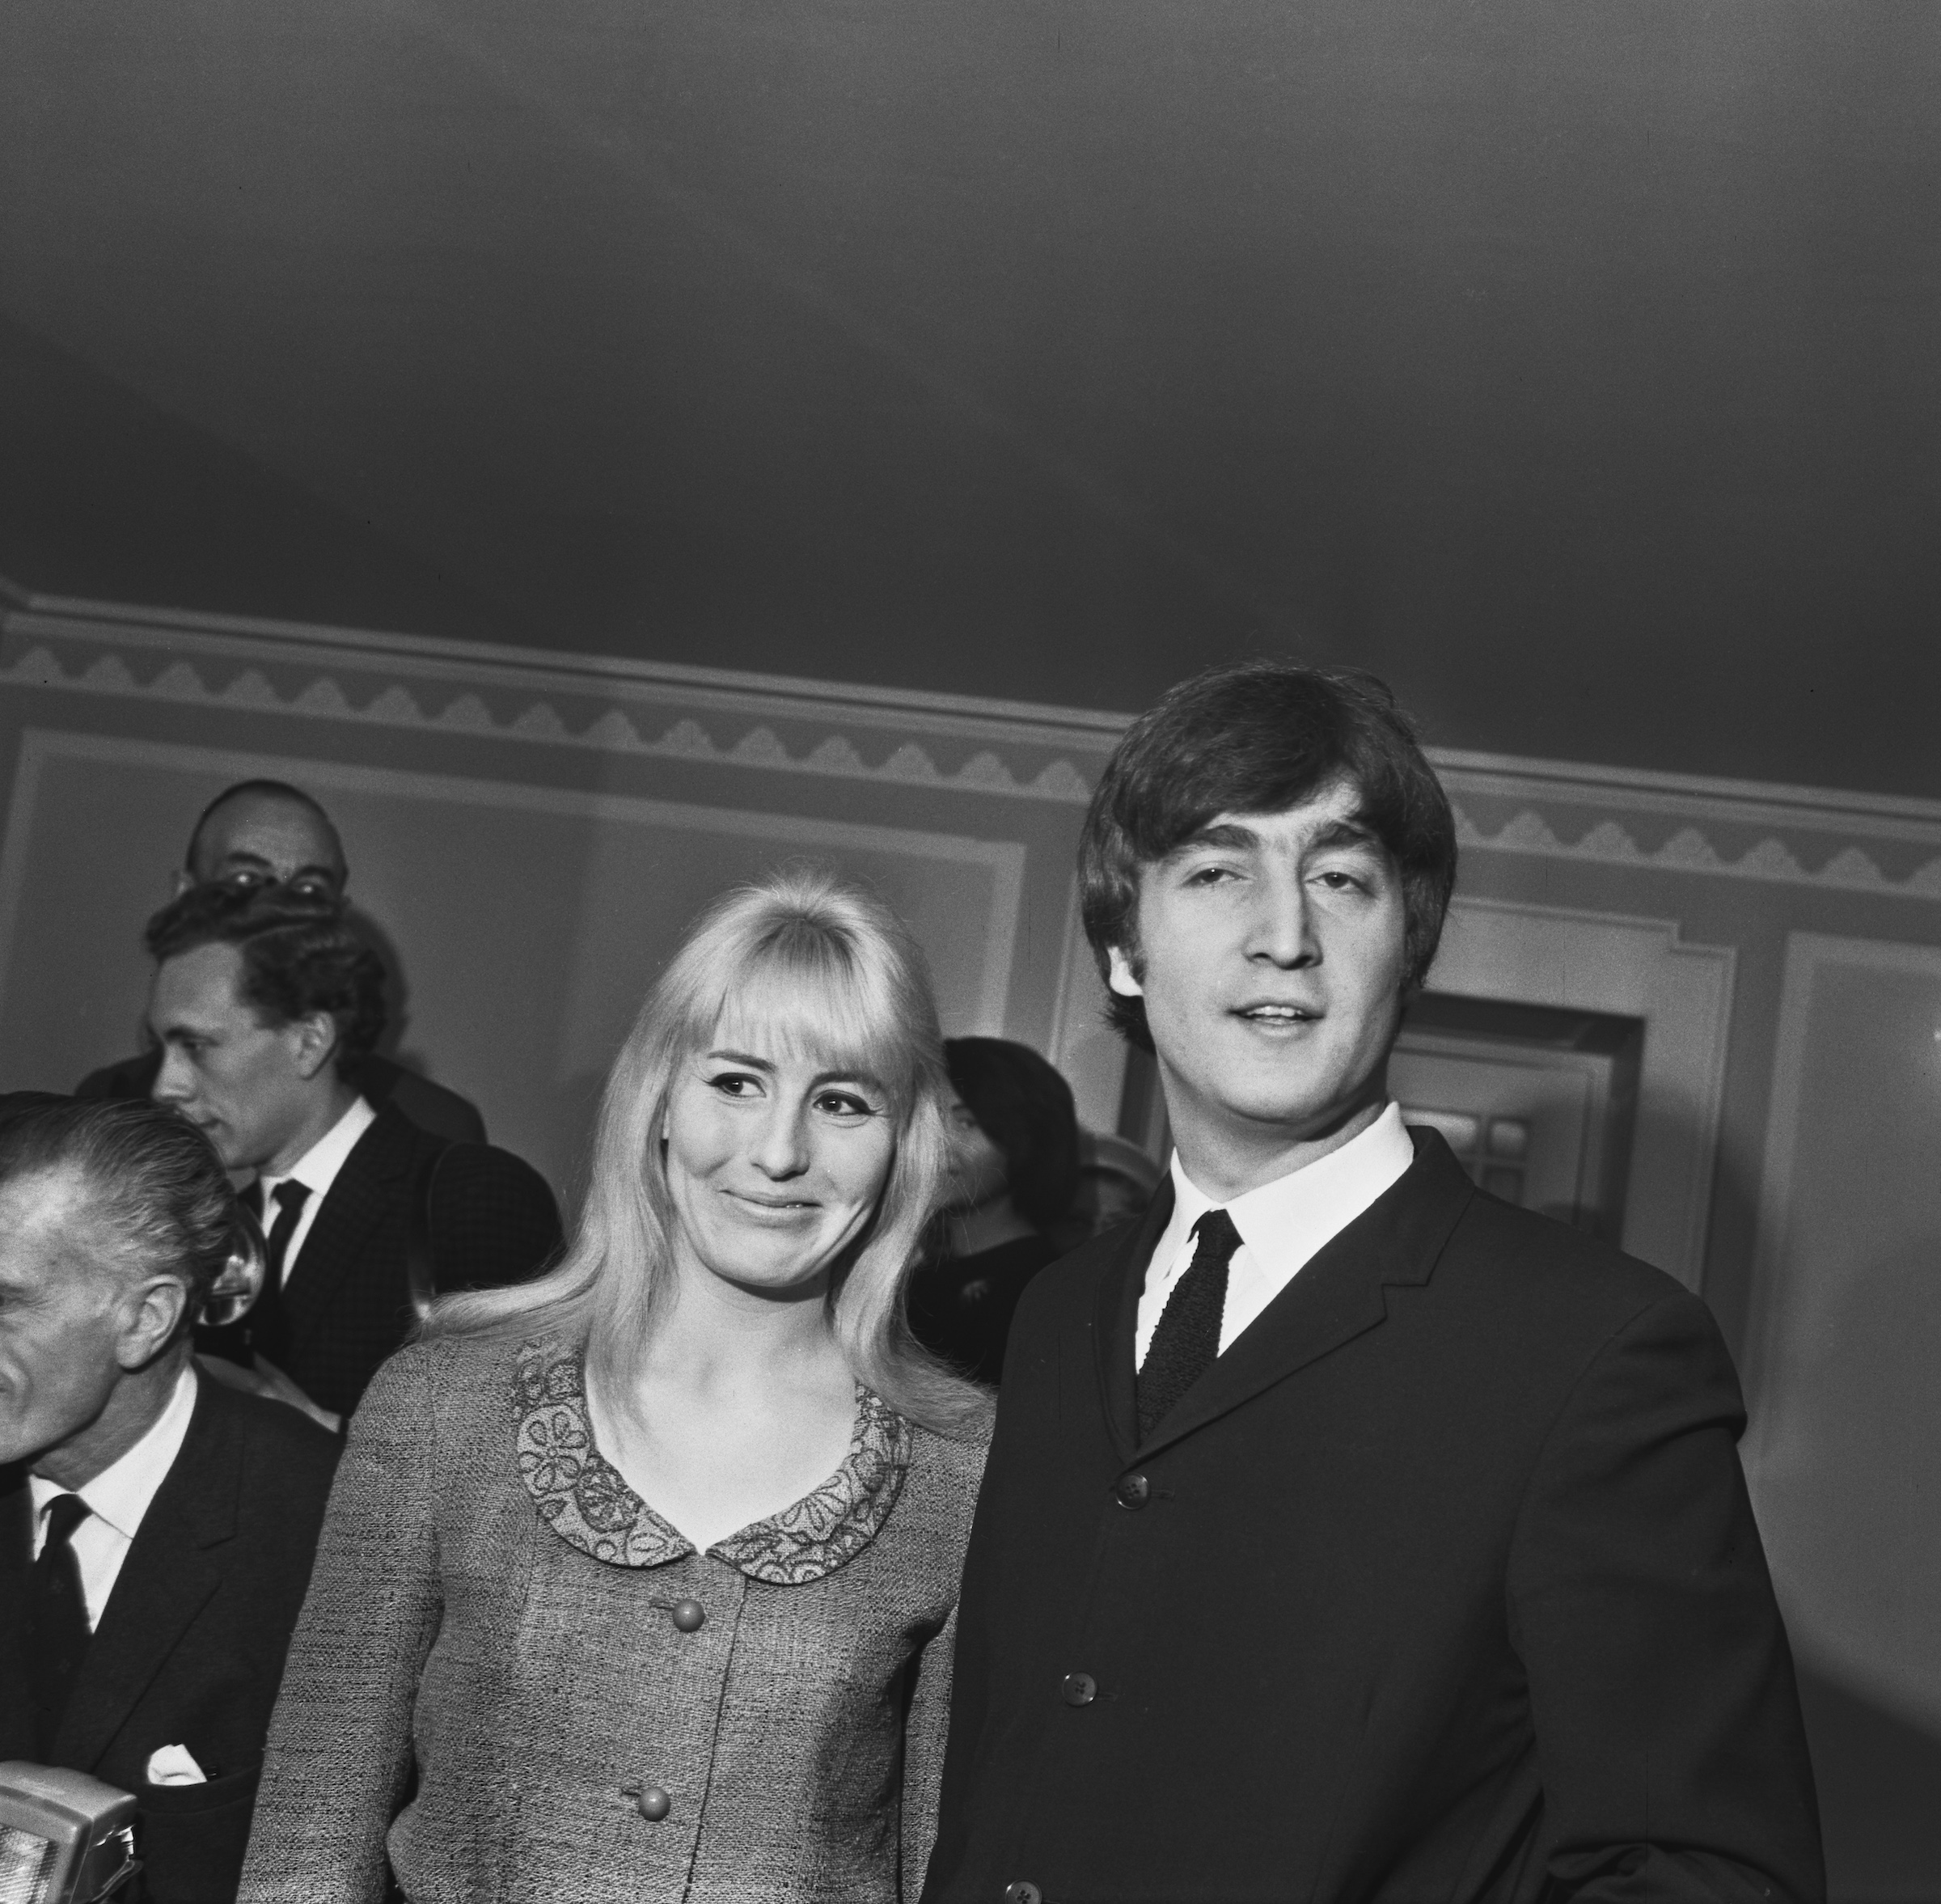 English musician John Lennon (1940 - 1980) of the Beatles with his wife Cynthia at the launch of his book 'In His Own Write'